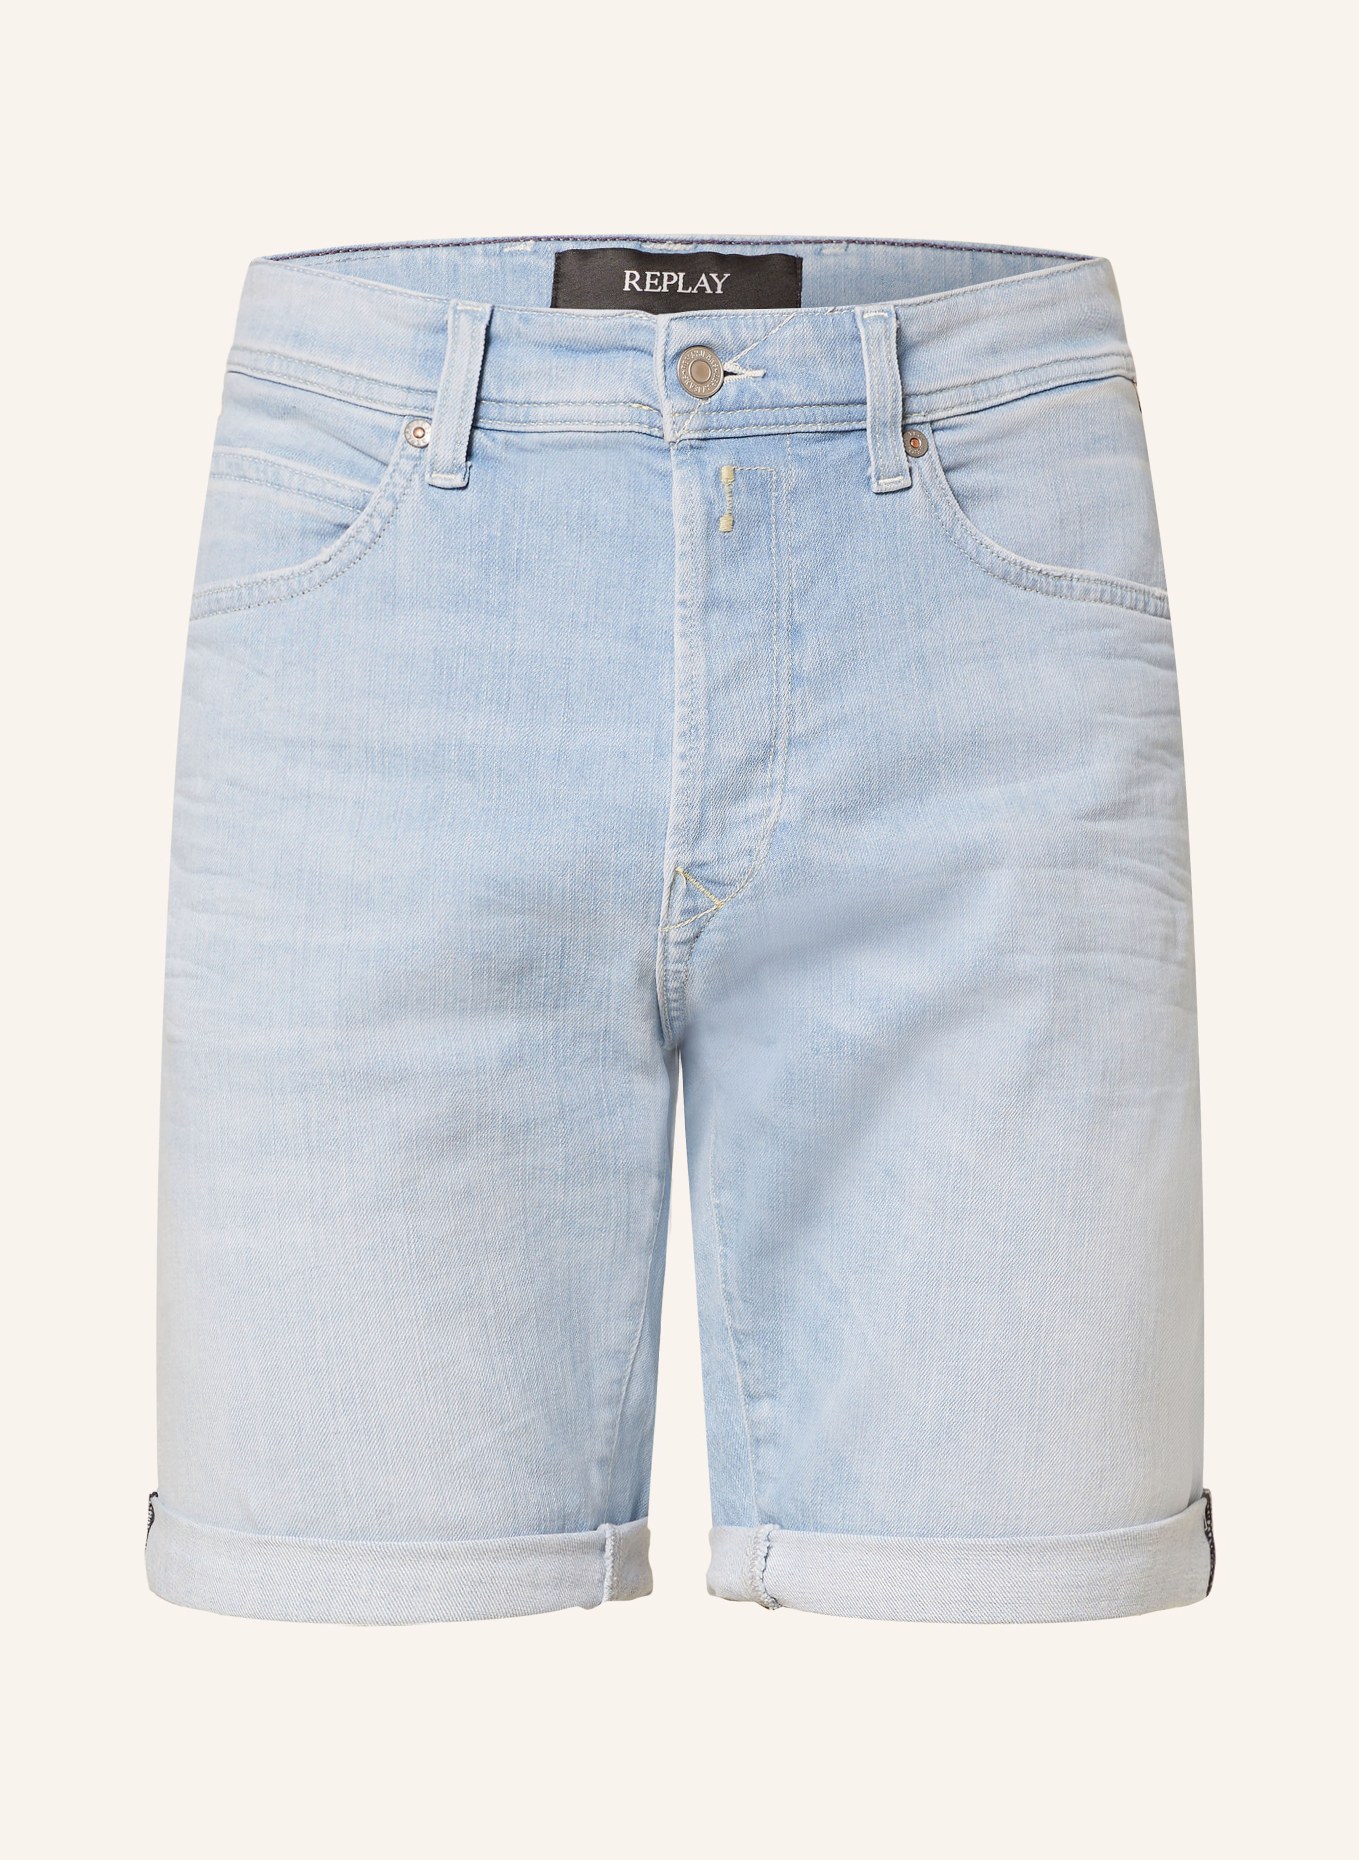 REPLAY Jeansshorts 573 Tapered Fit, Farbe: 010 LIGHT BLUE (Bild 1)